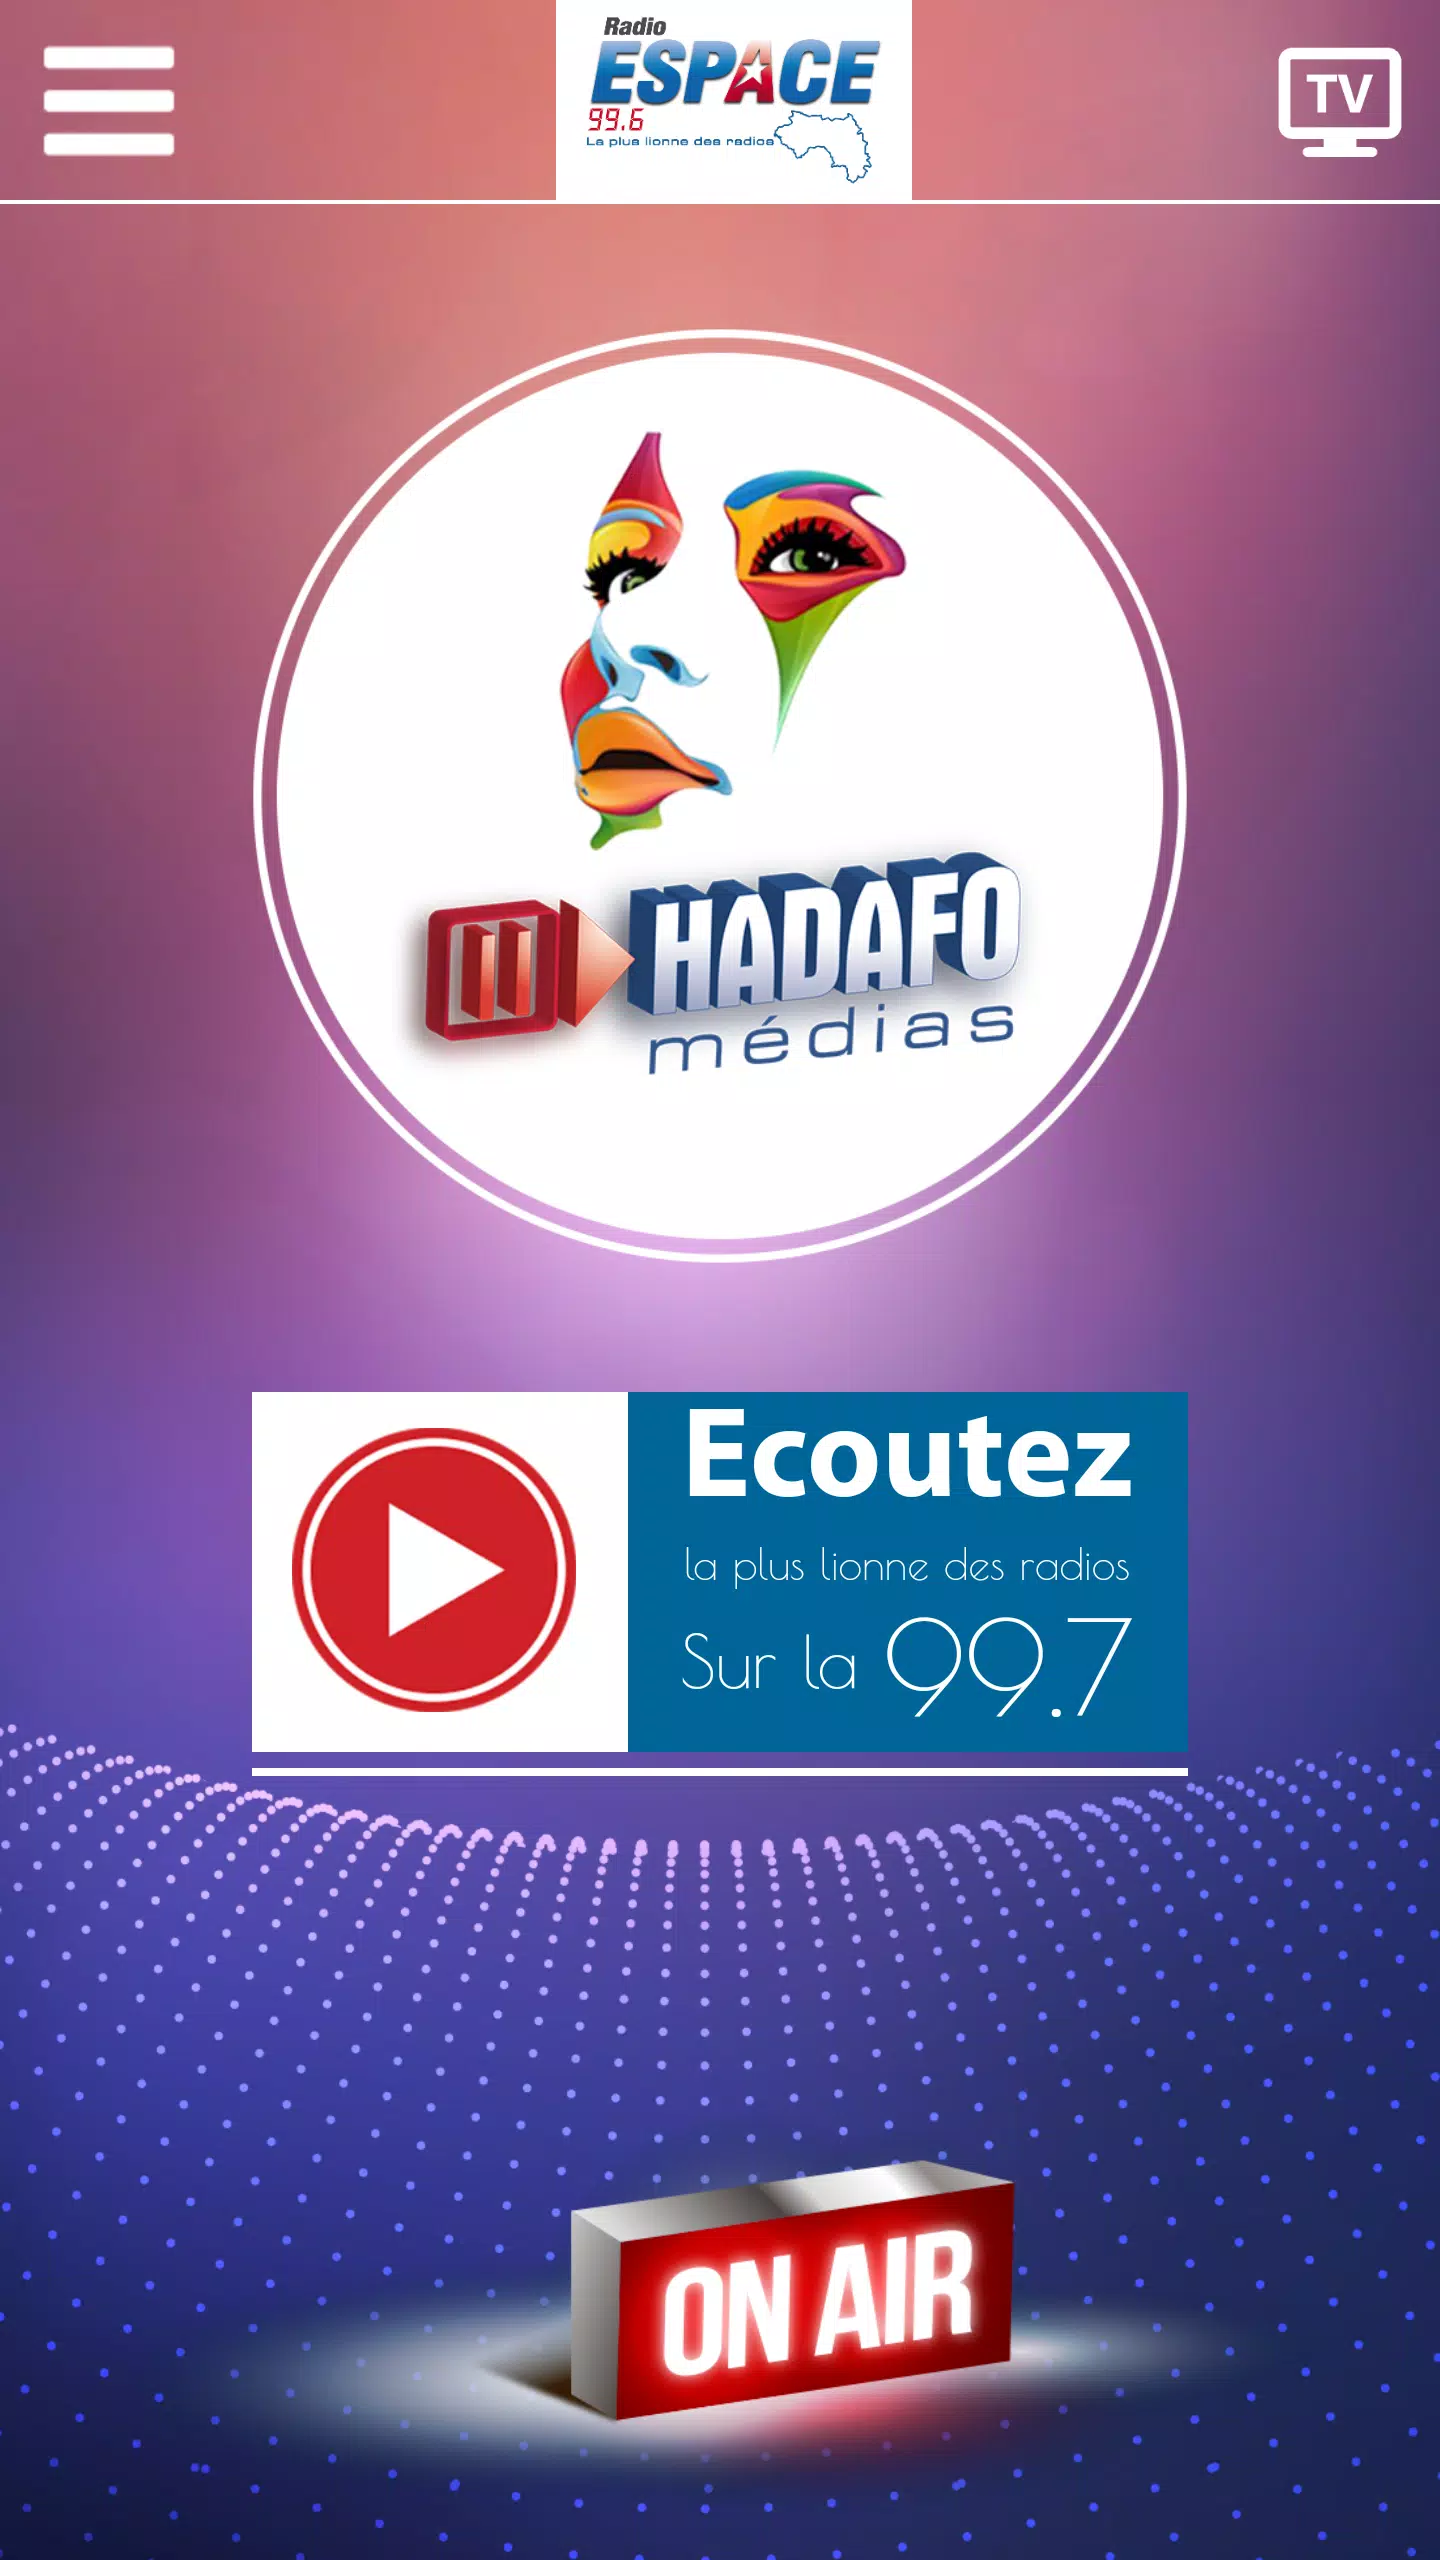 ESPACE FM GUINEE APK for Android Download